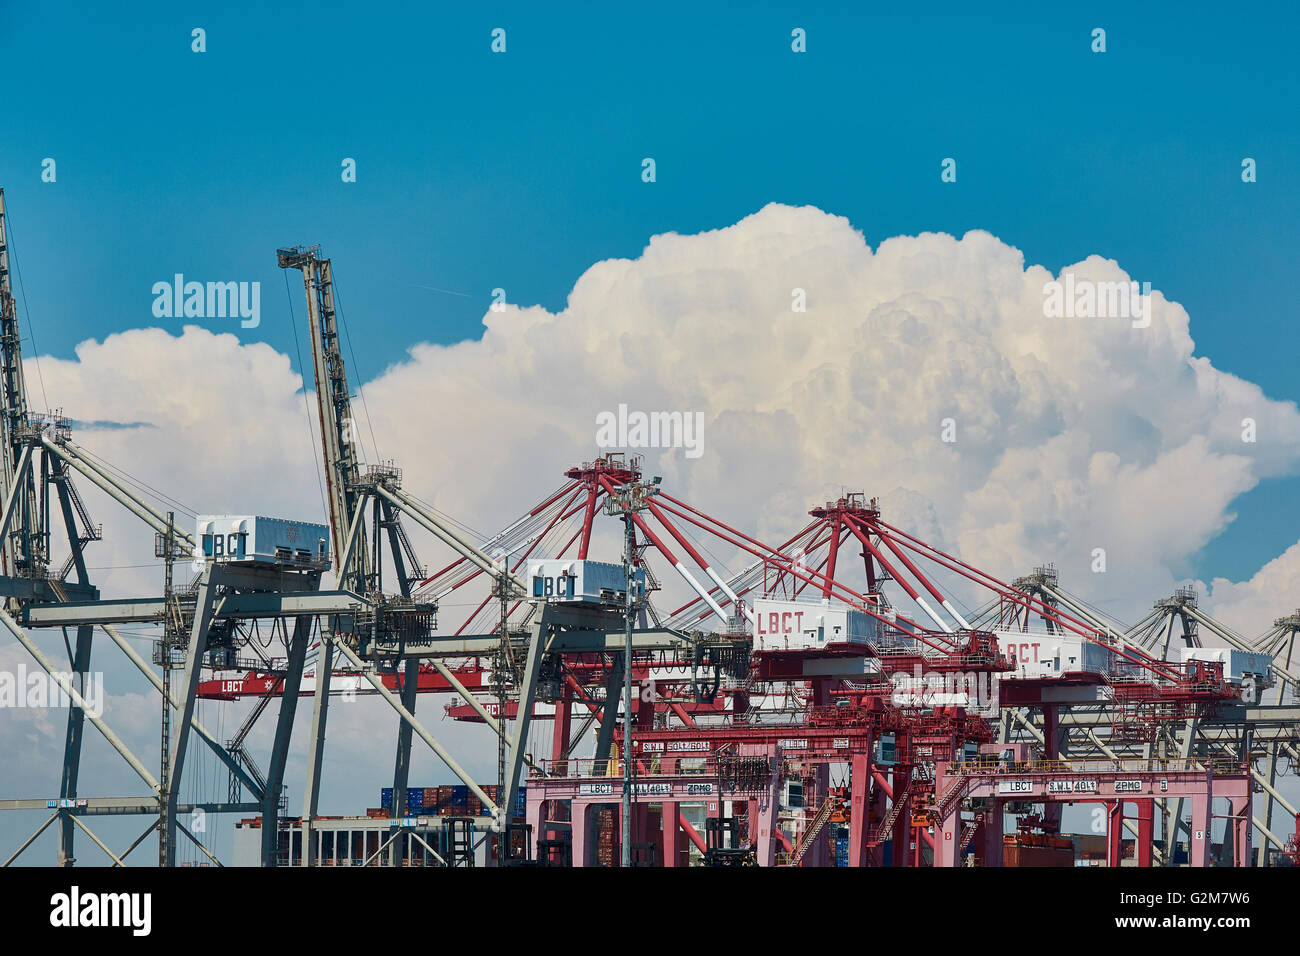 Shipping Container Cranes At Long Beach Container Terminal With Towering Cumulonimbus Storm Clouds In The Background. Stock Photo